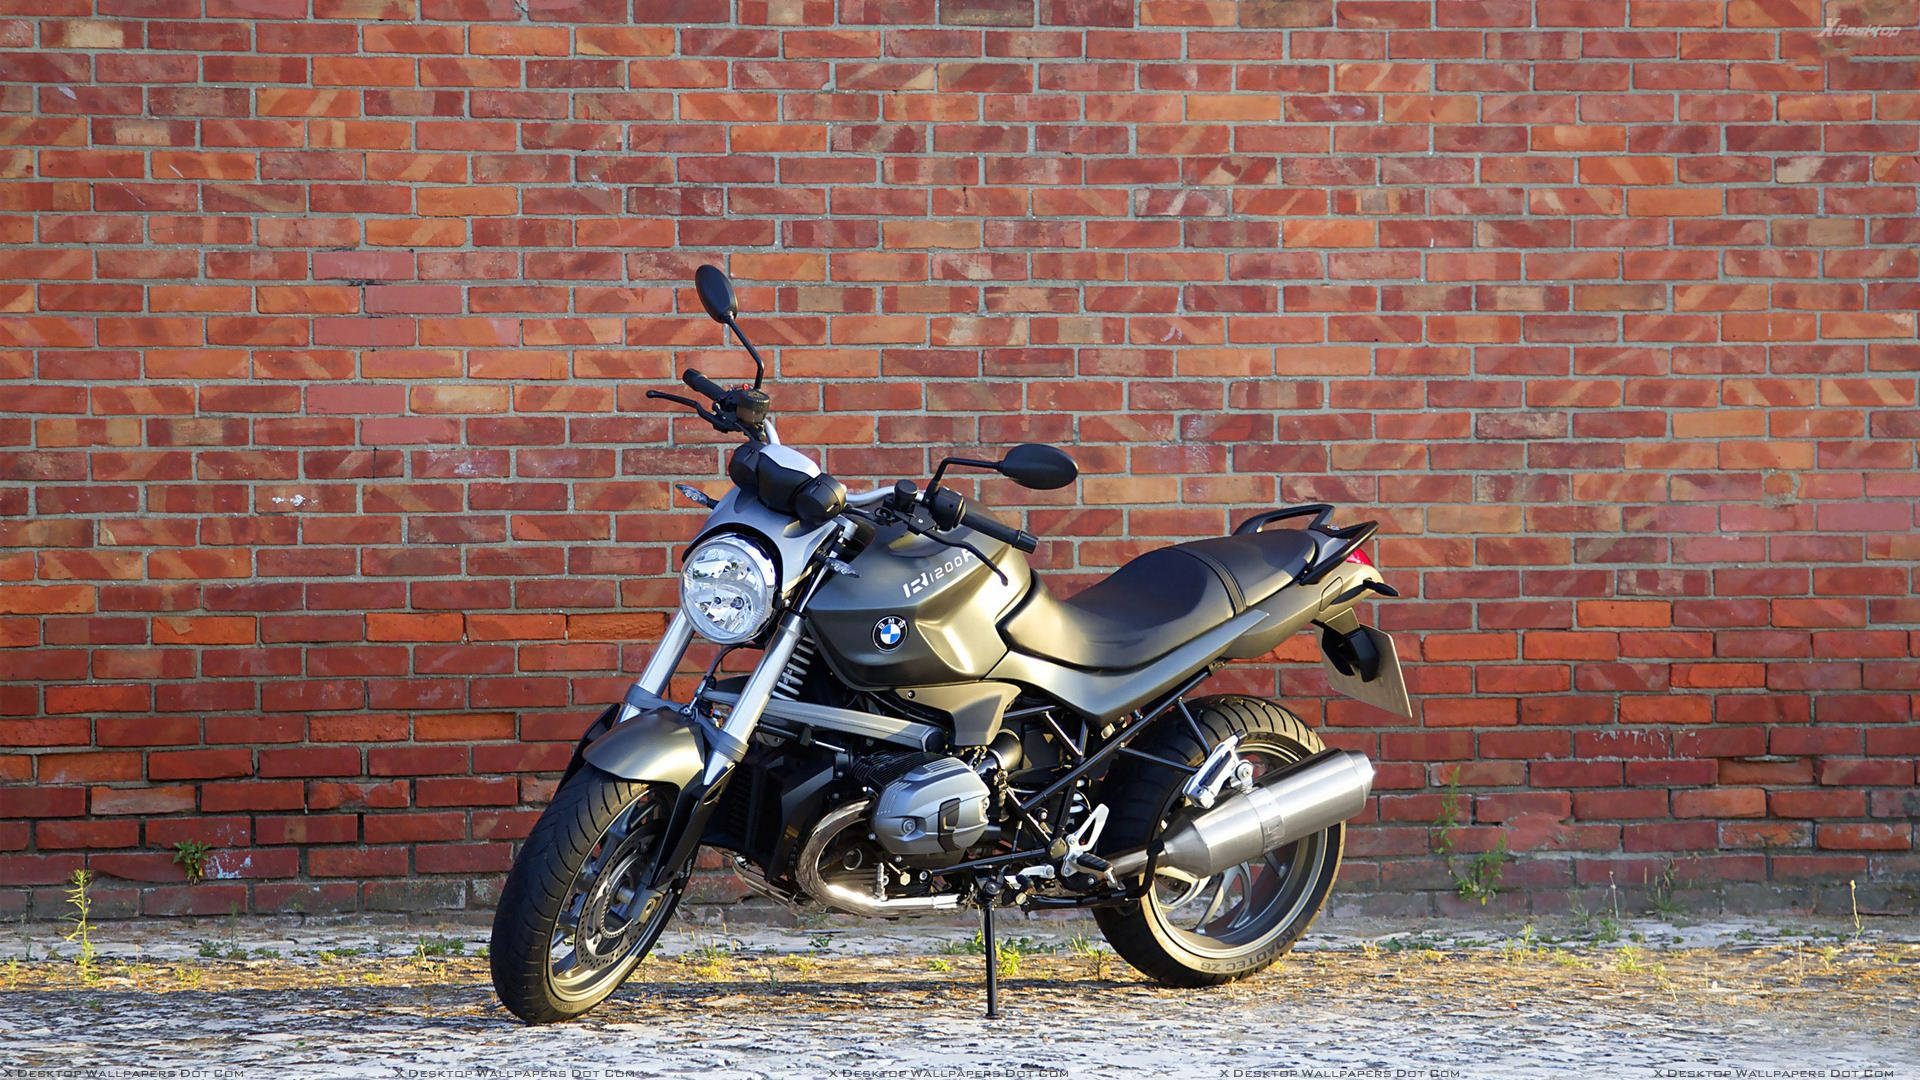 Cruise in Style on a Black BMW R1200R Motorbike Wallpaper